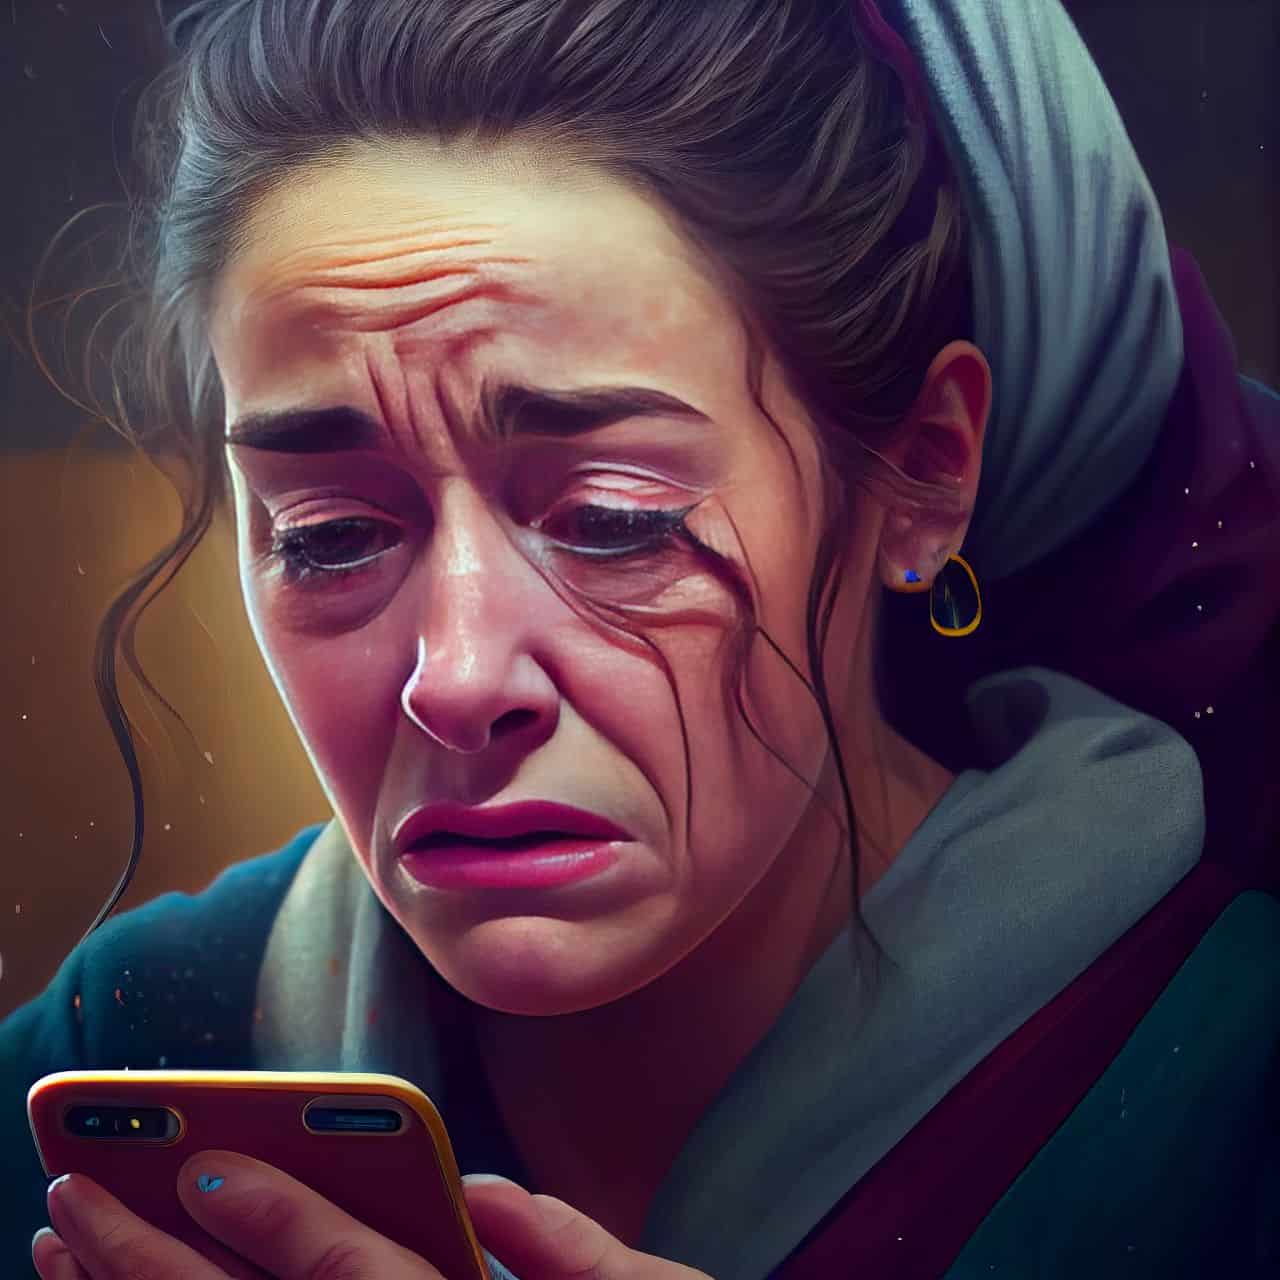 mother crying looking at her phone